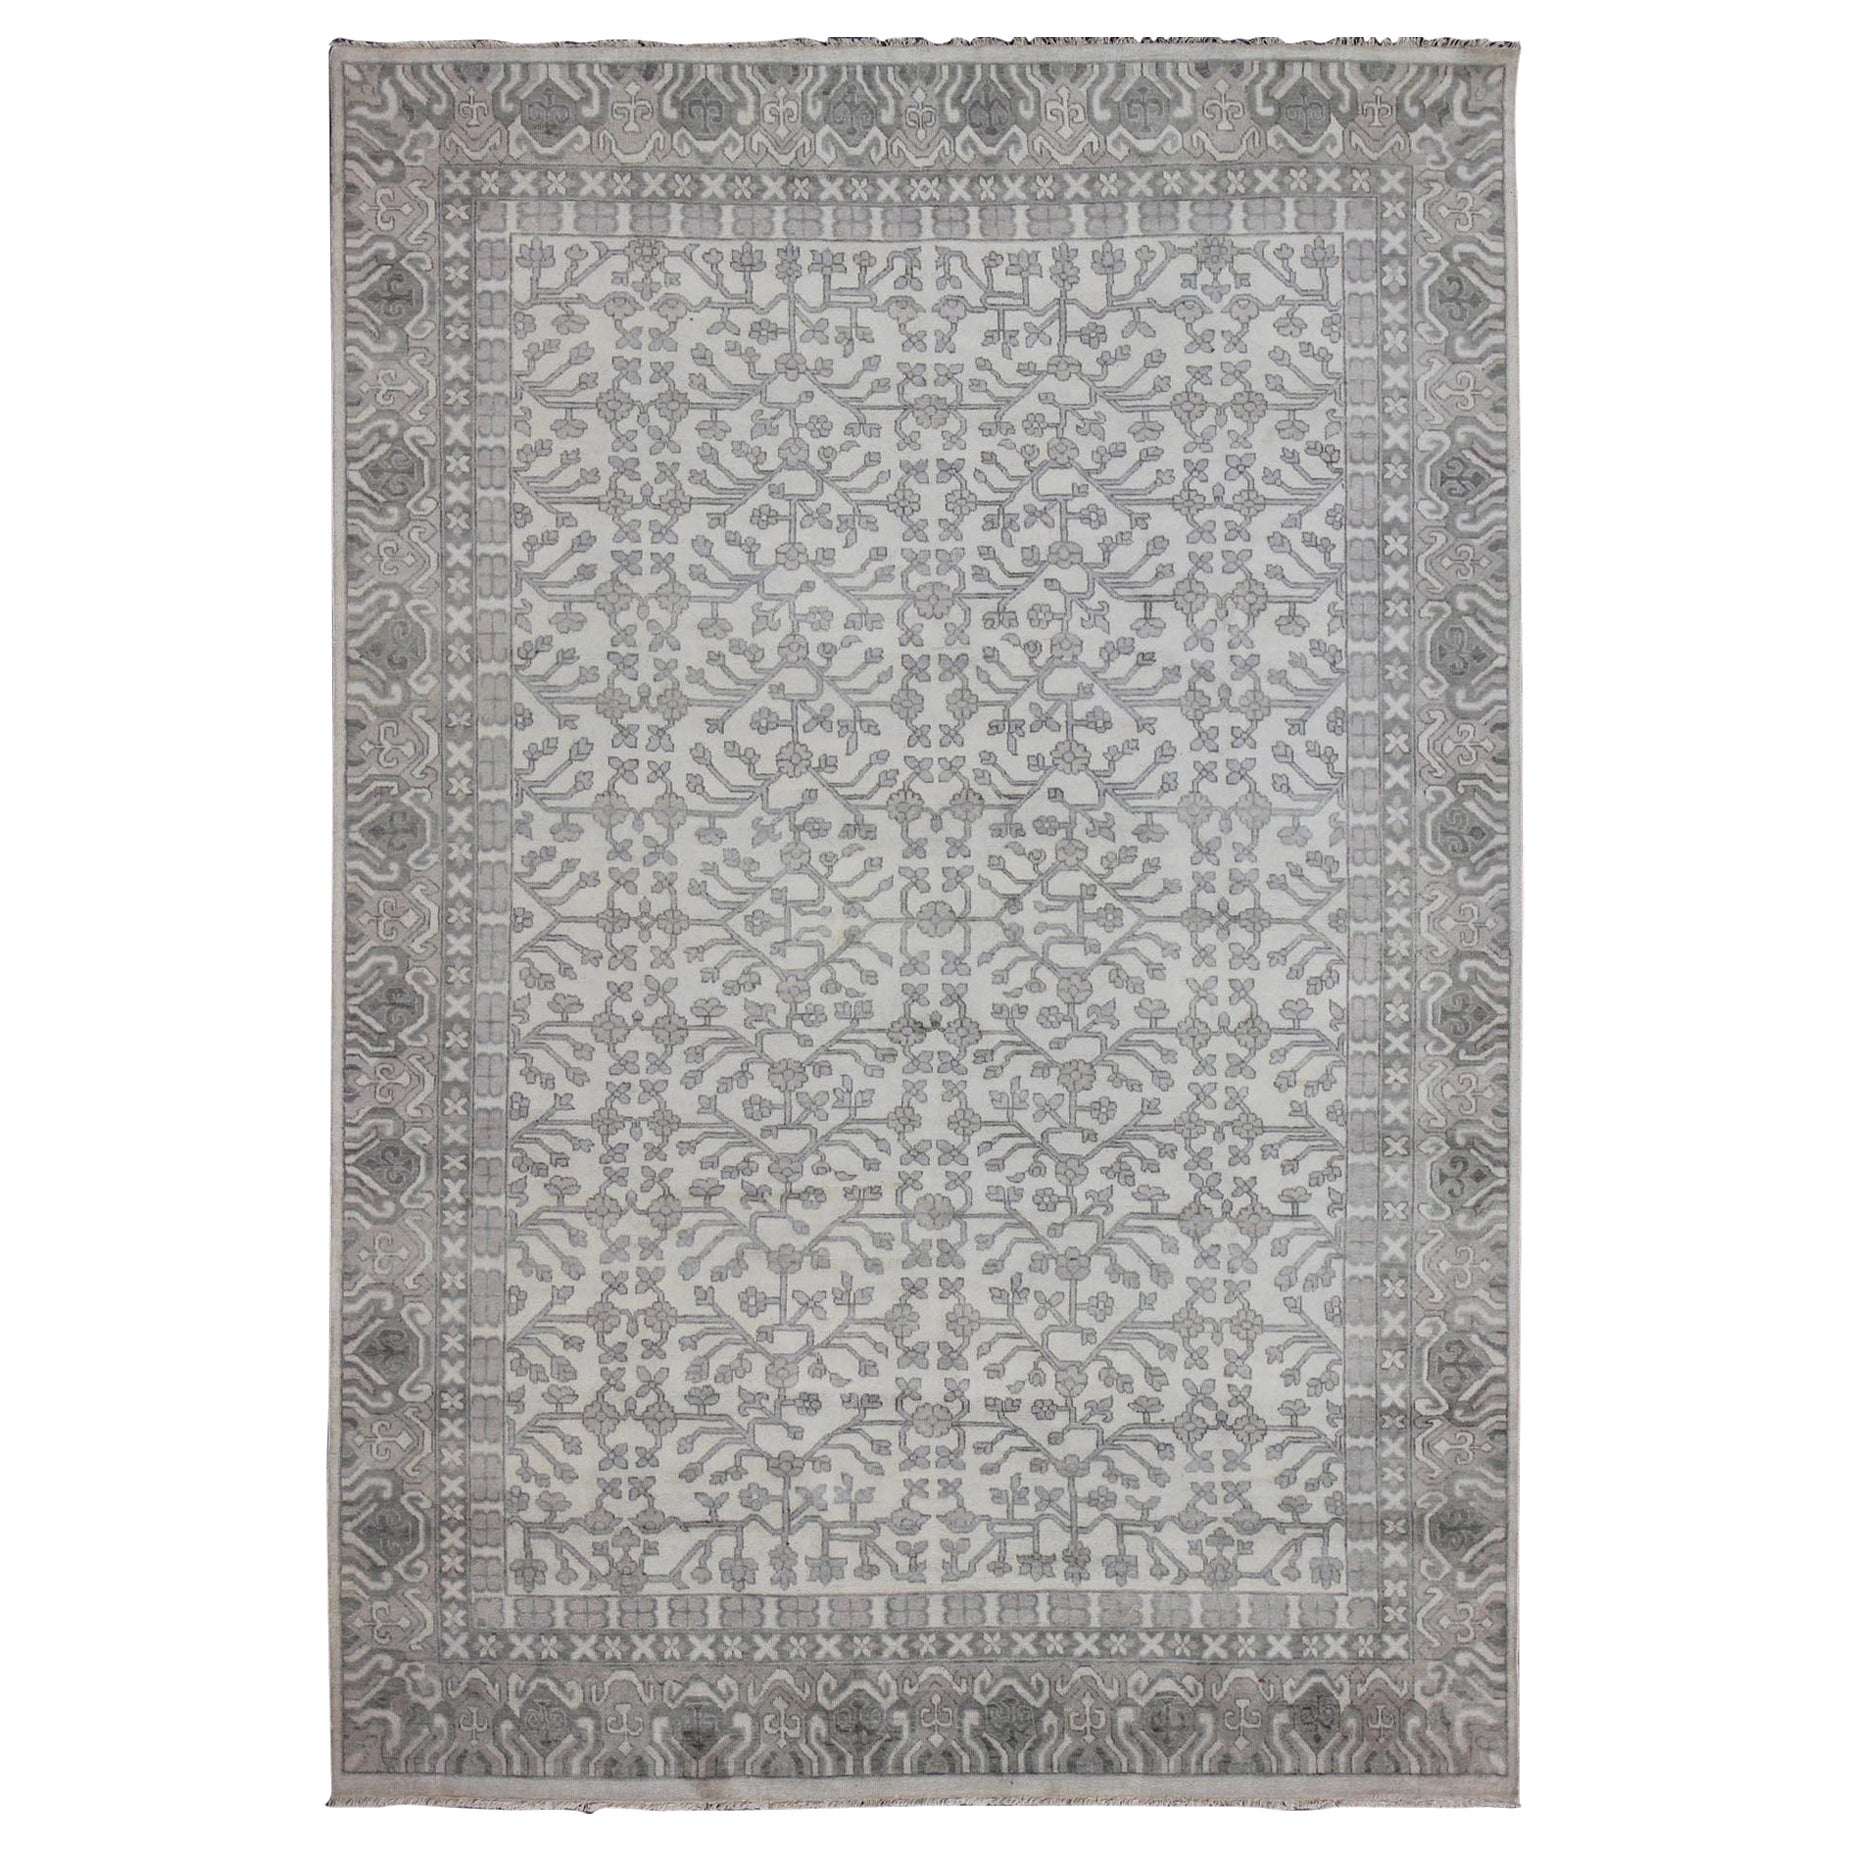 Keivan Woven Arts Hand Knotted Wool Khotan Rug with All-Over Design  9'6 x 13'6 For Sale